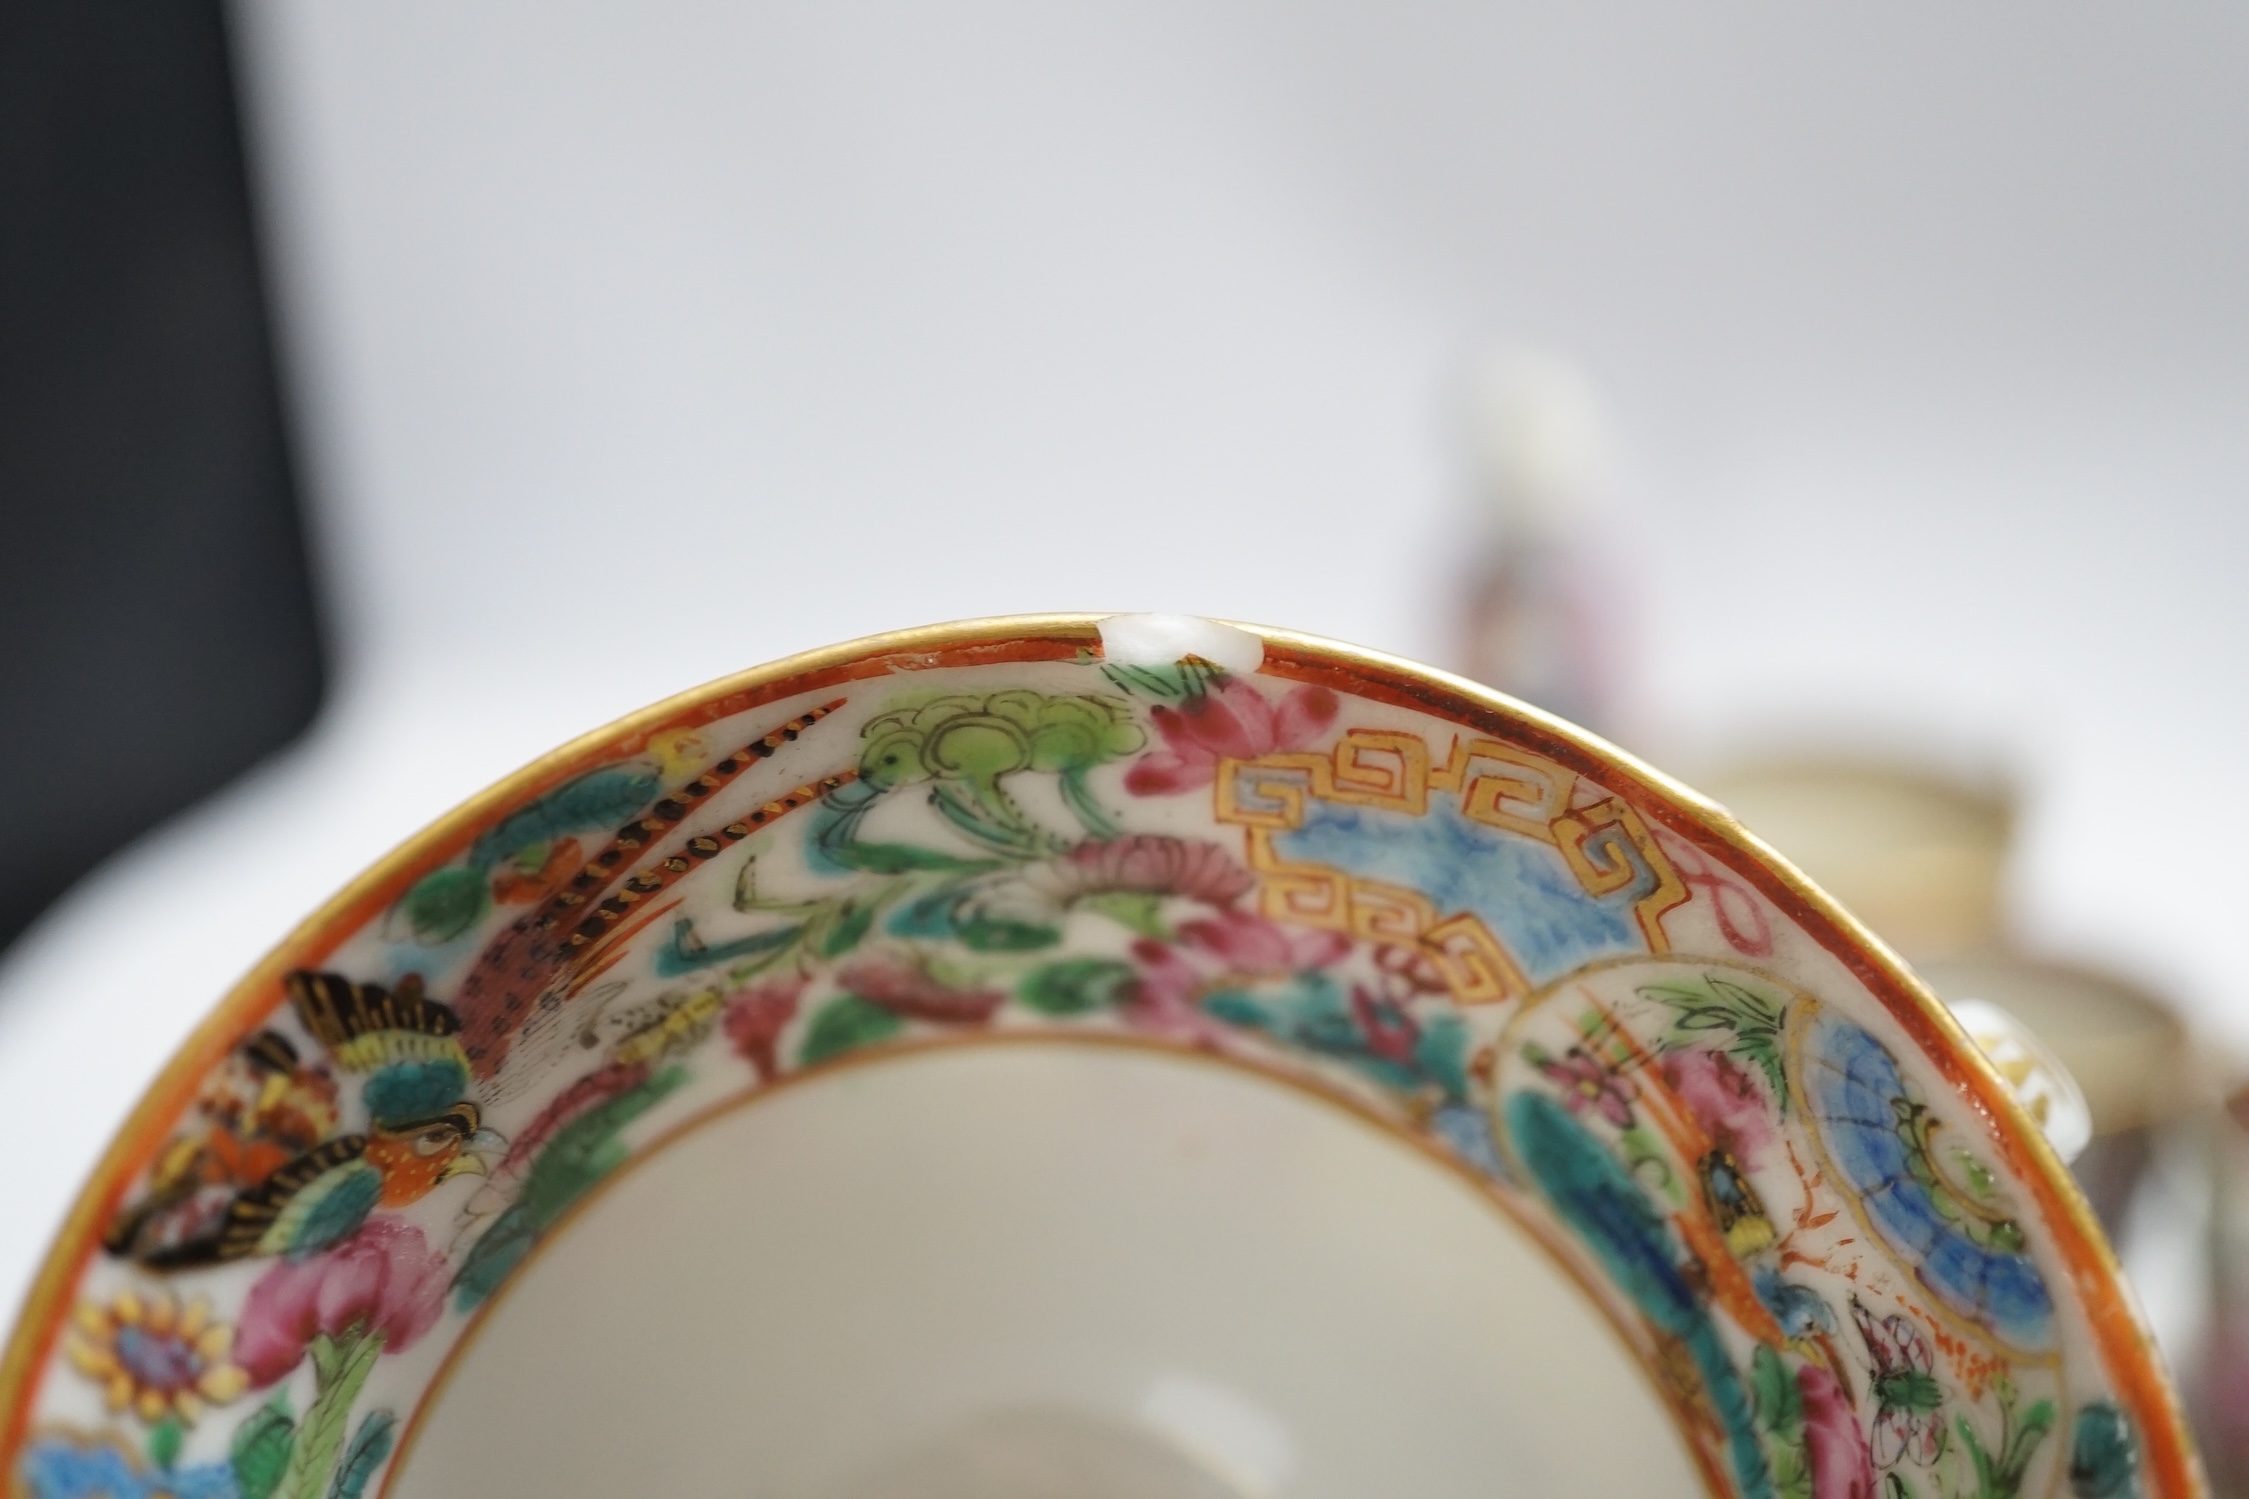 Chinese famille rose porcelain including plates, cups, saucers and a figure, 18th and 19th century, largest 27cm diameter